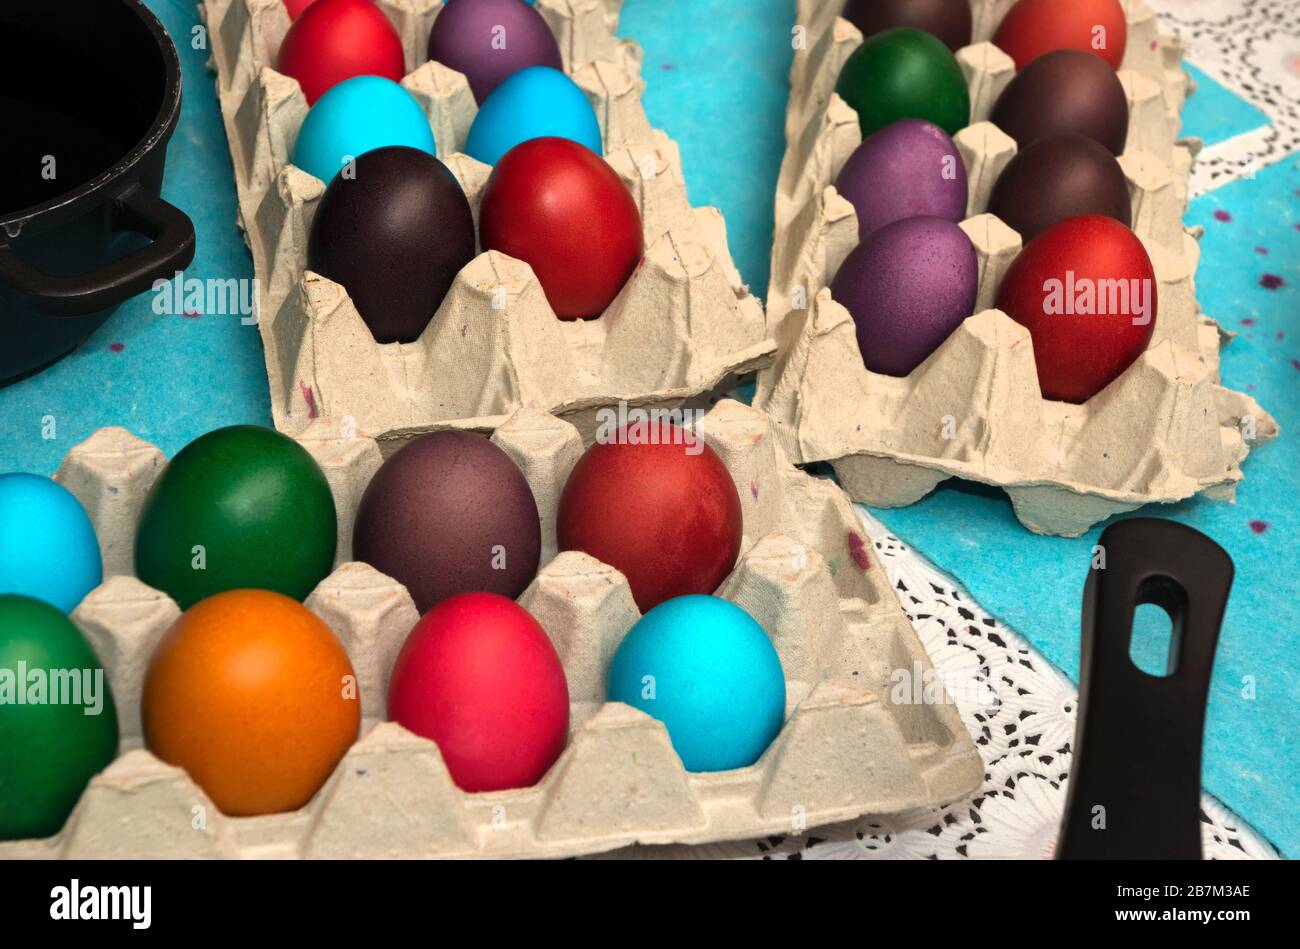 Multicolored painted Easter eggs in cardboard container Stock Photo